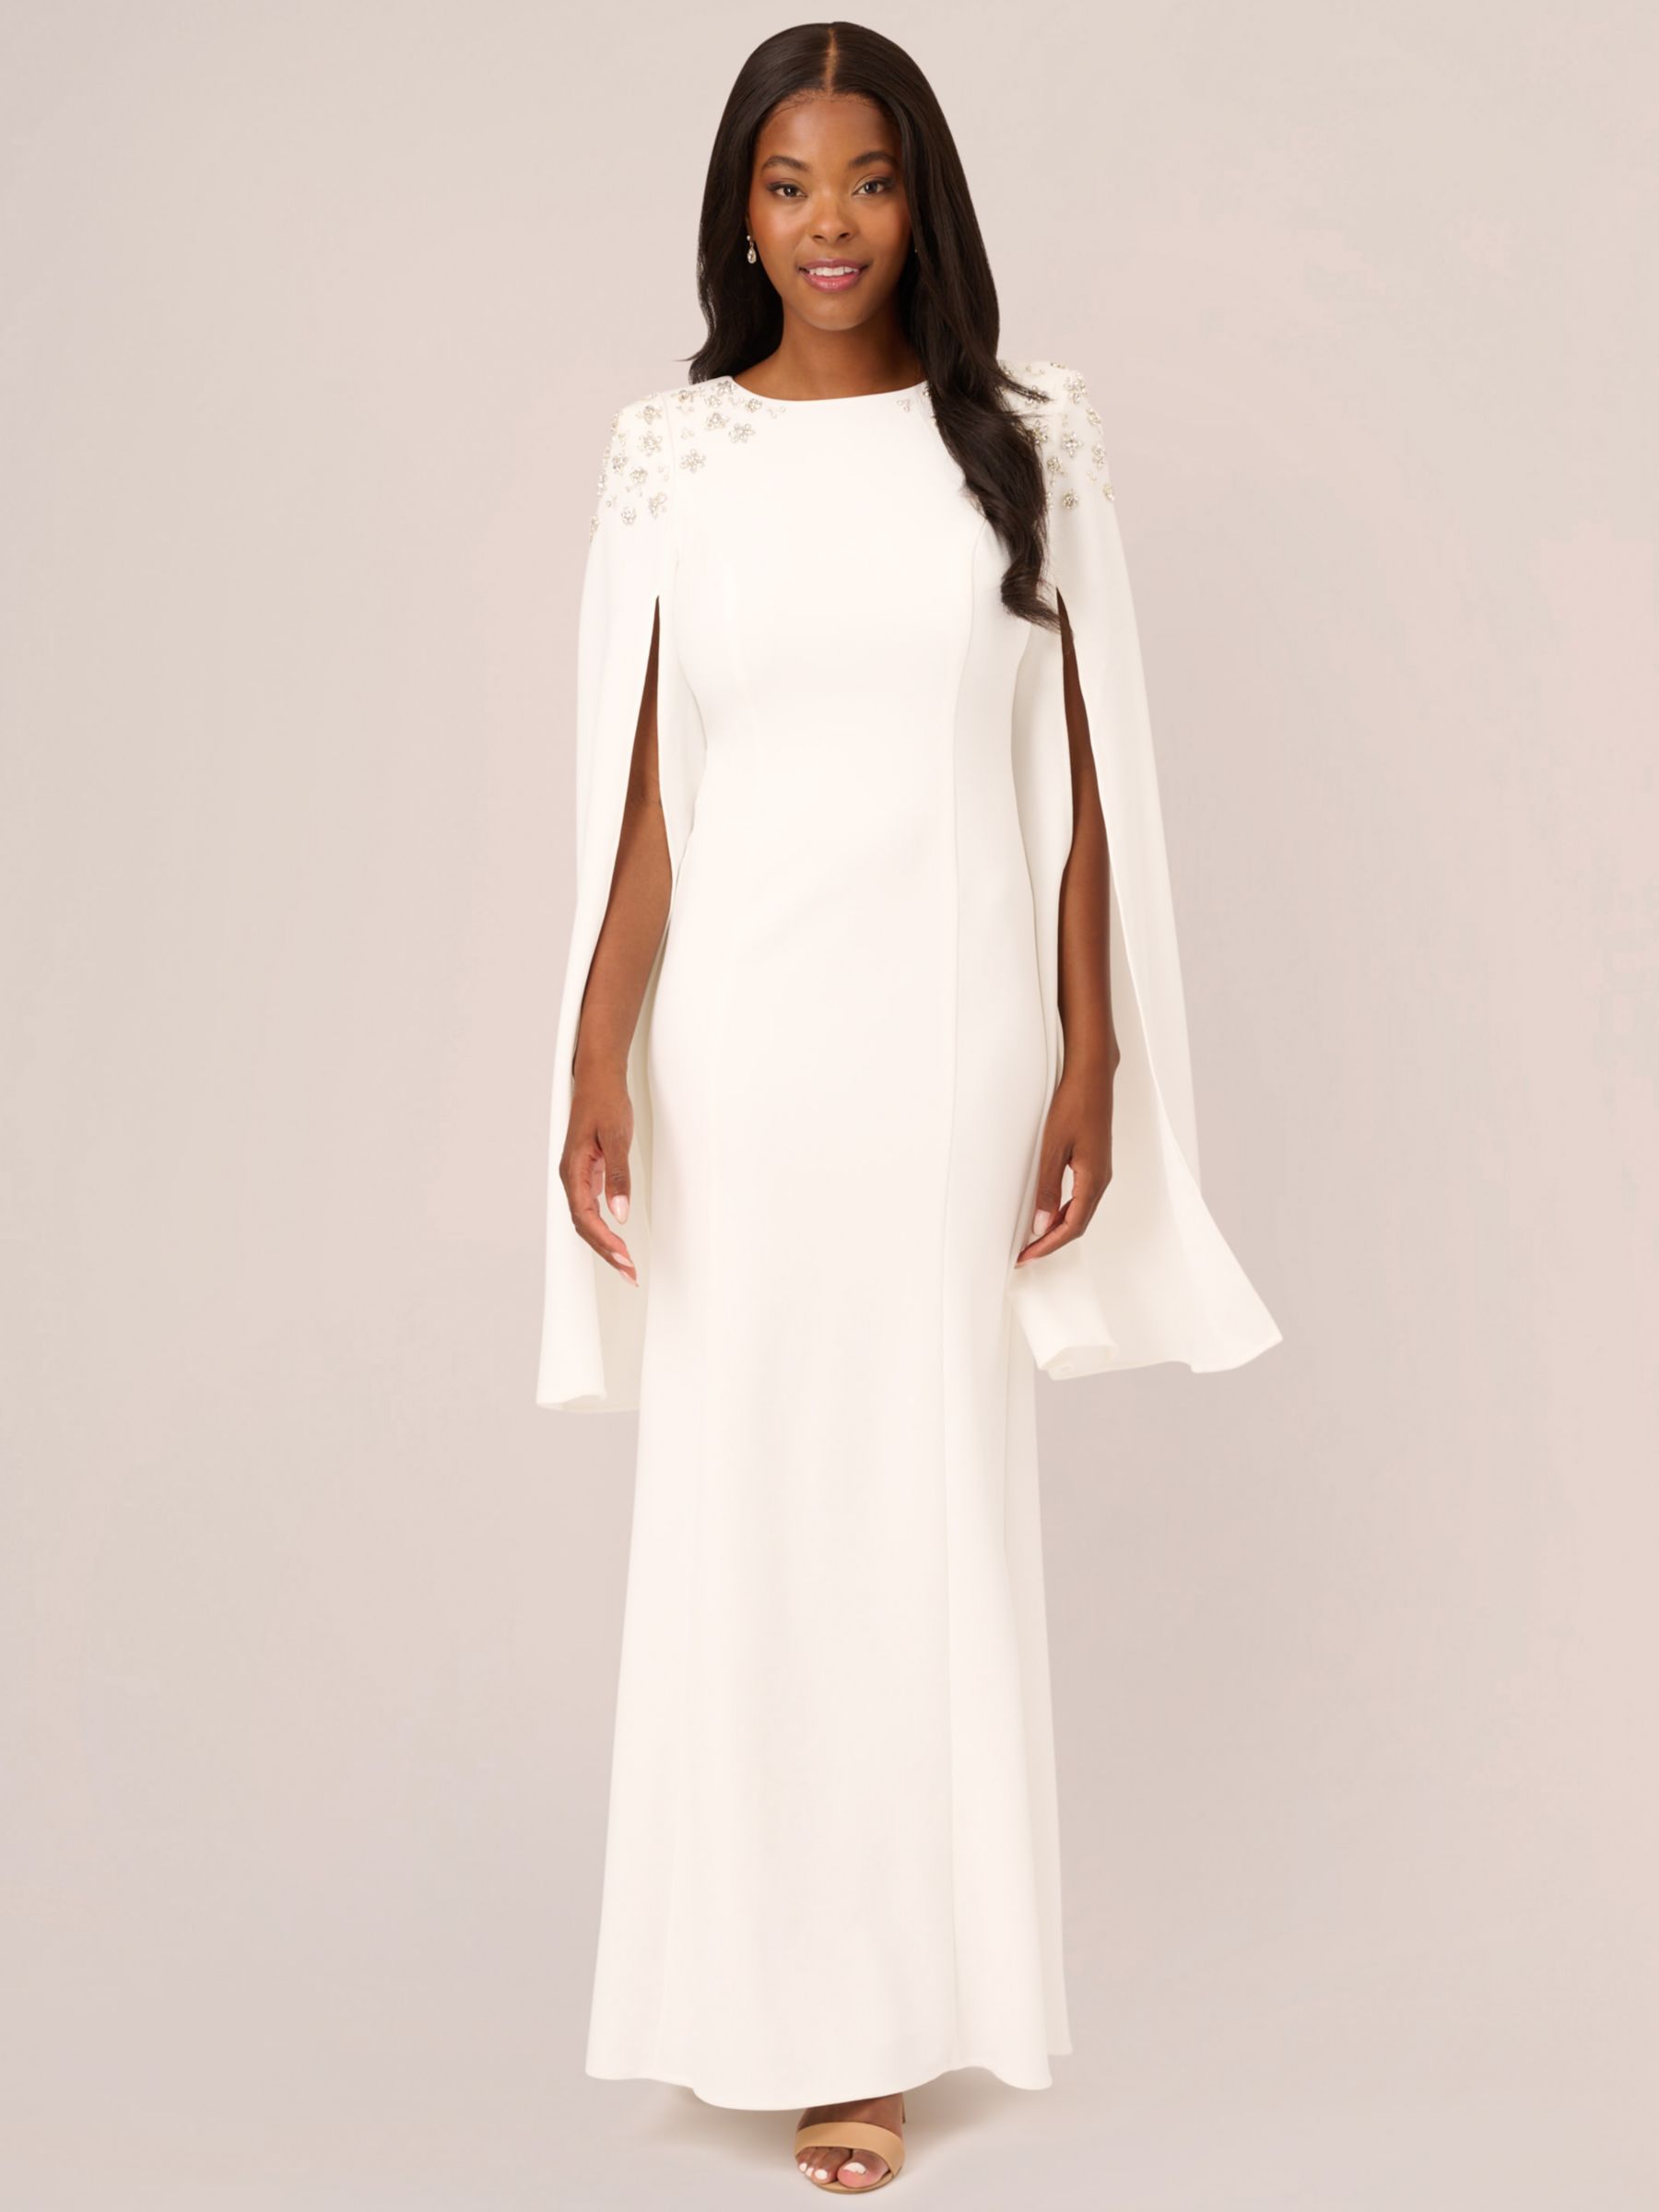 Adrianna Papell Crepe Beaded Cape Sleeve Gown, Ivory, 6